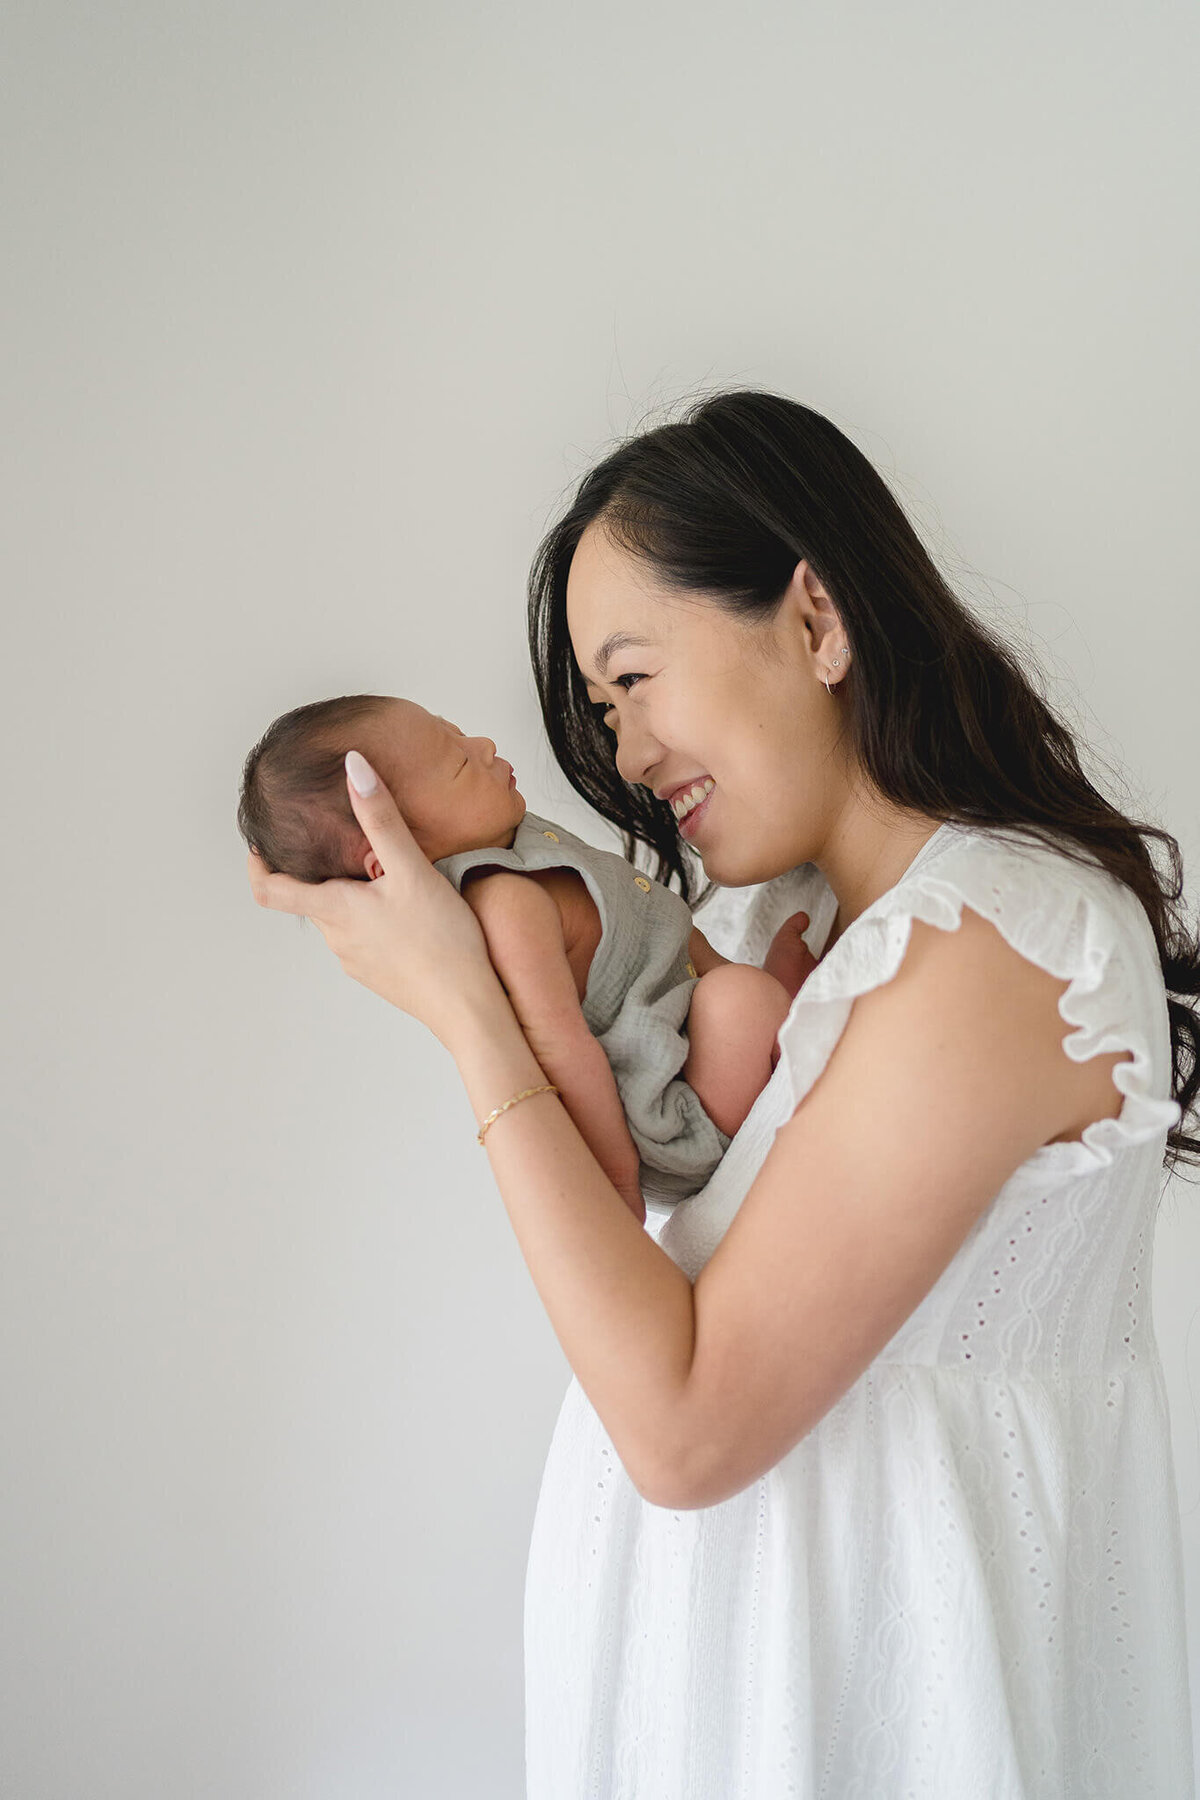 Join a Chinese first-time mum as they create memories with their newborn in Gold Coast's cozy ambiance.